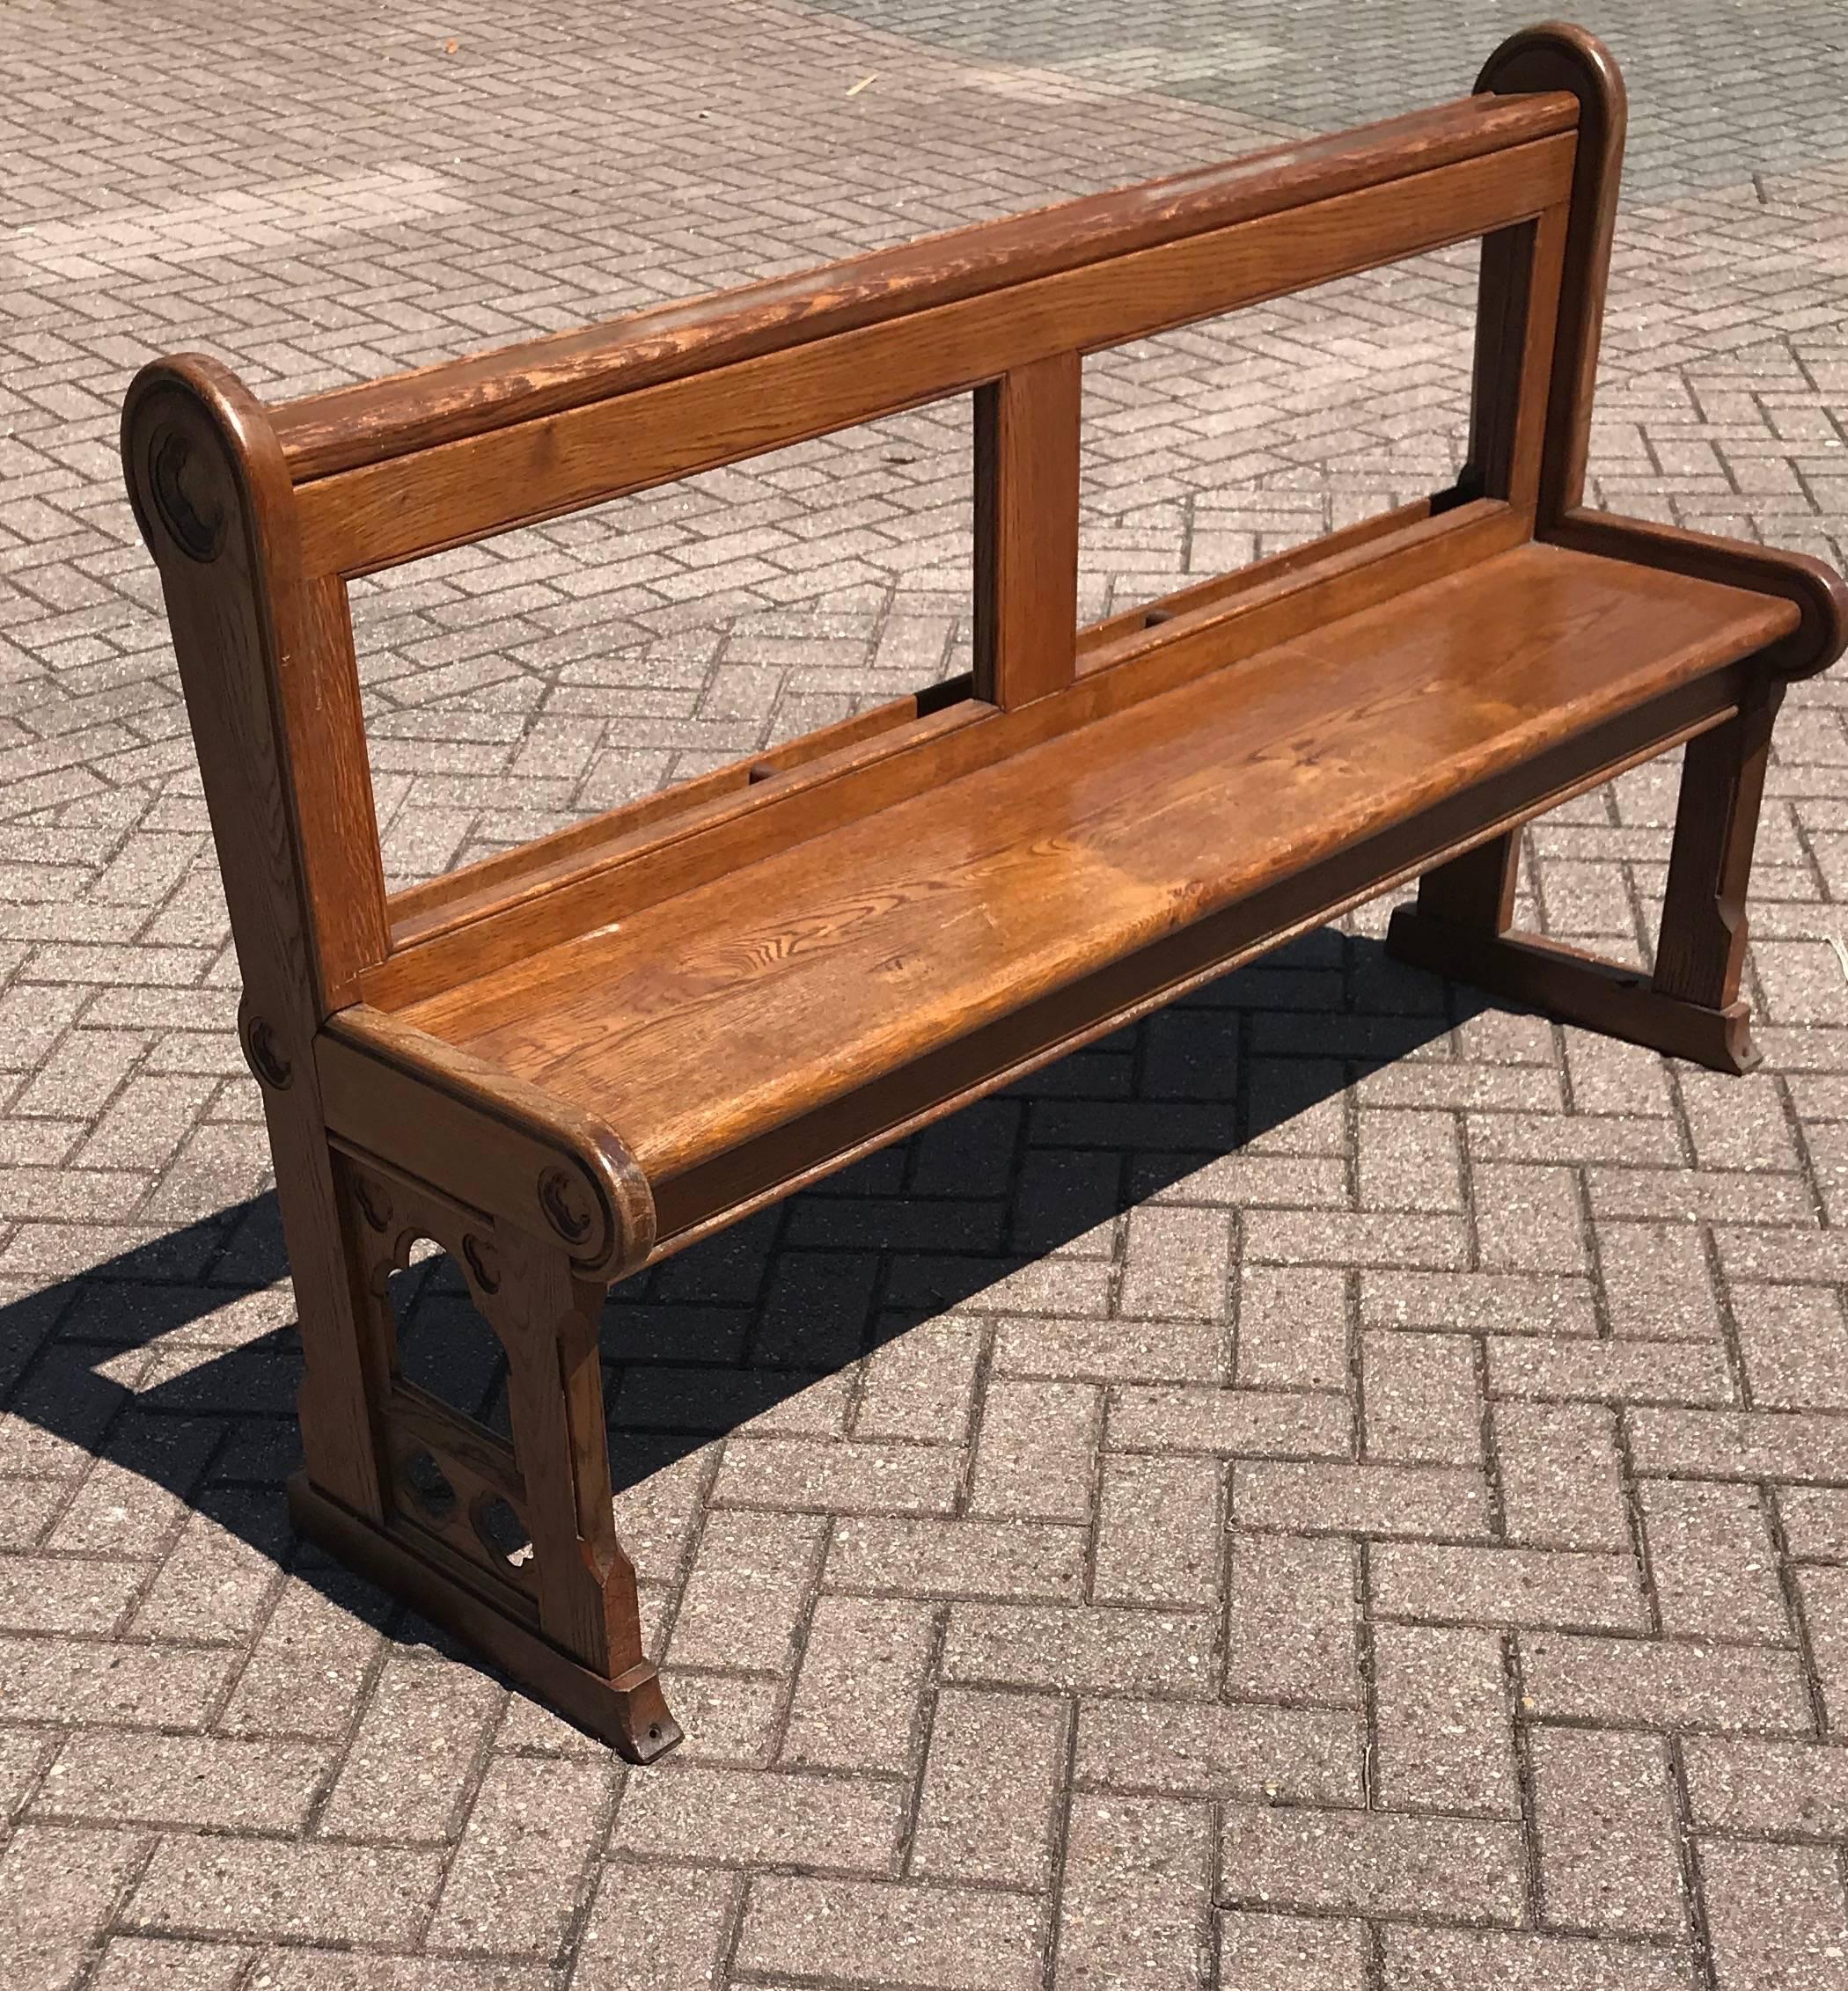 Antique and Handcrafted Gothic Revival Solid Tiger Oak Practical Hallway Bench In Excellent Condition For Sale In Lisse, NL